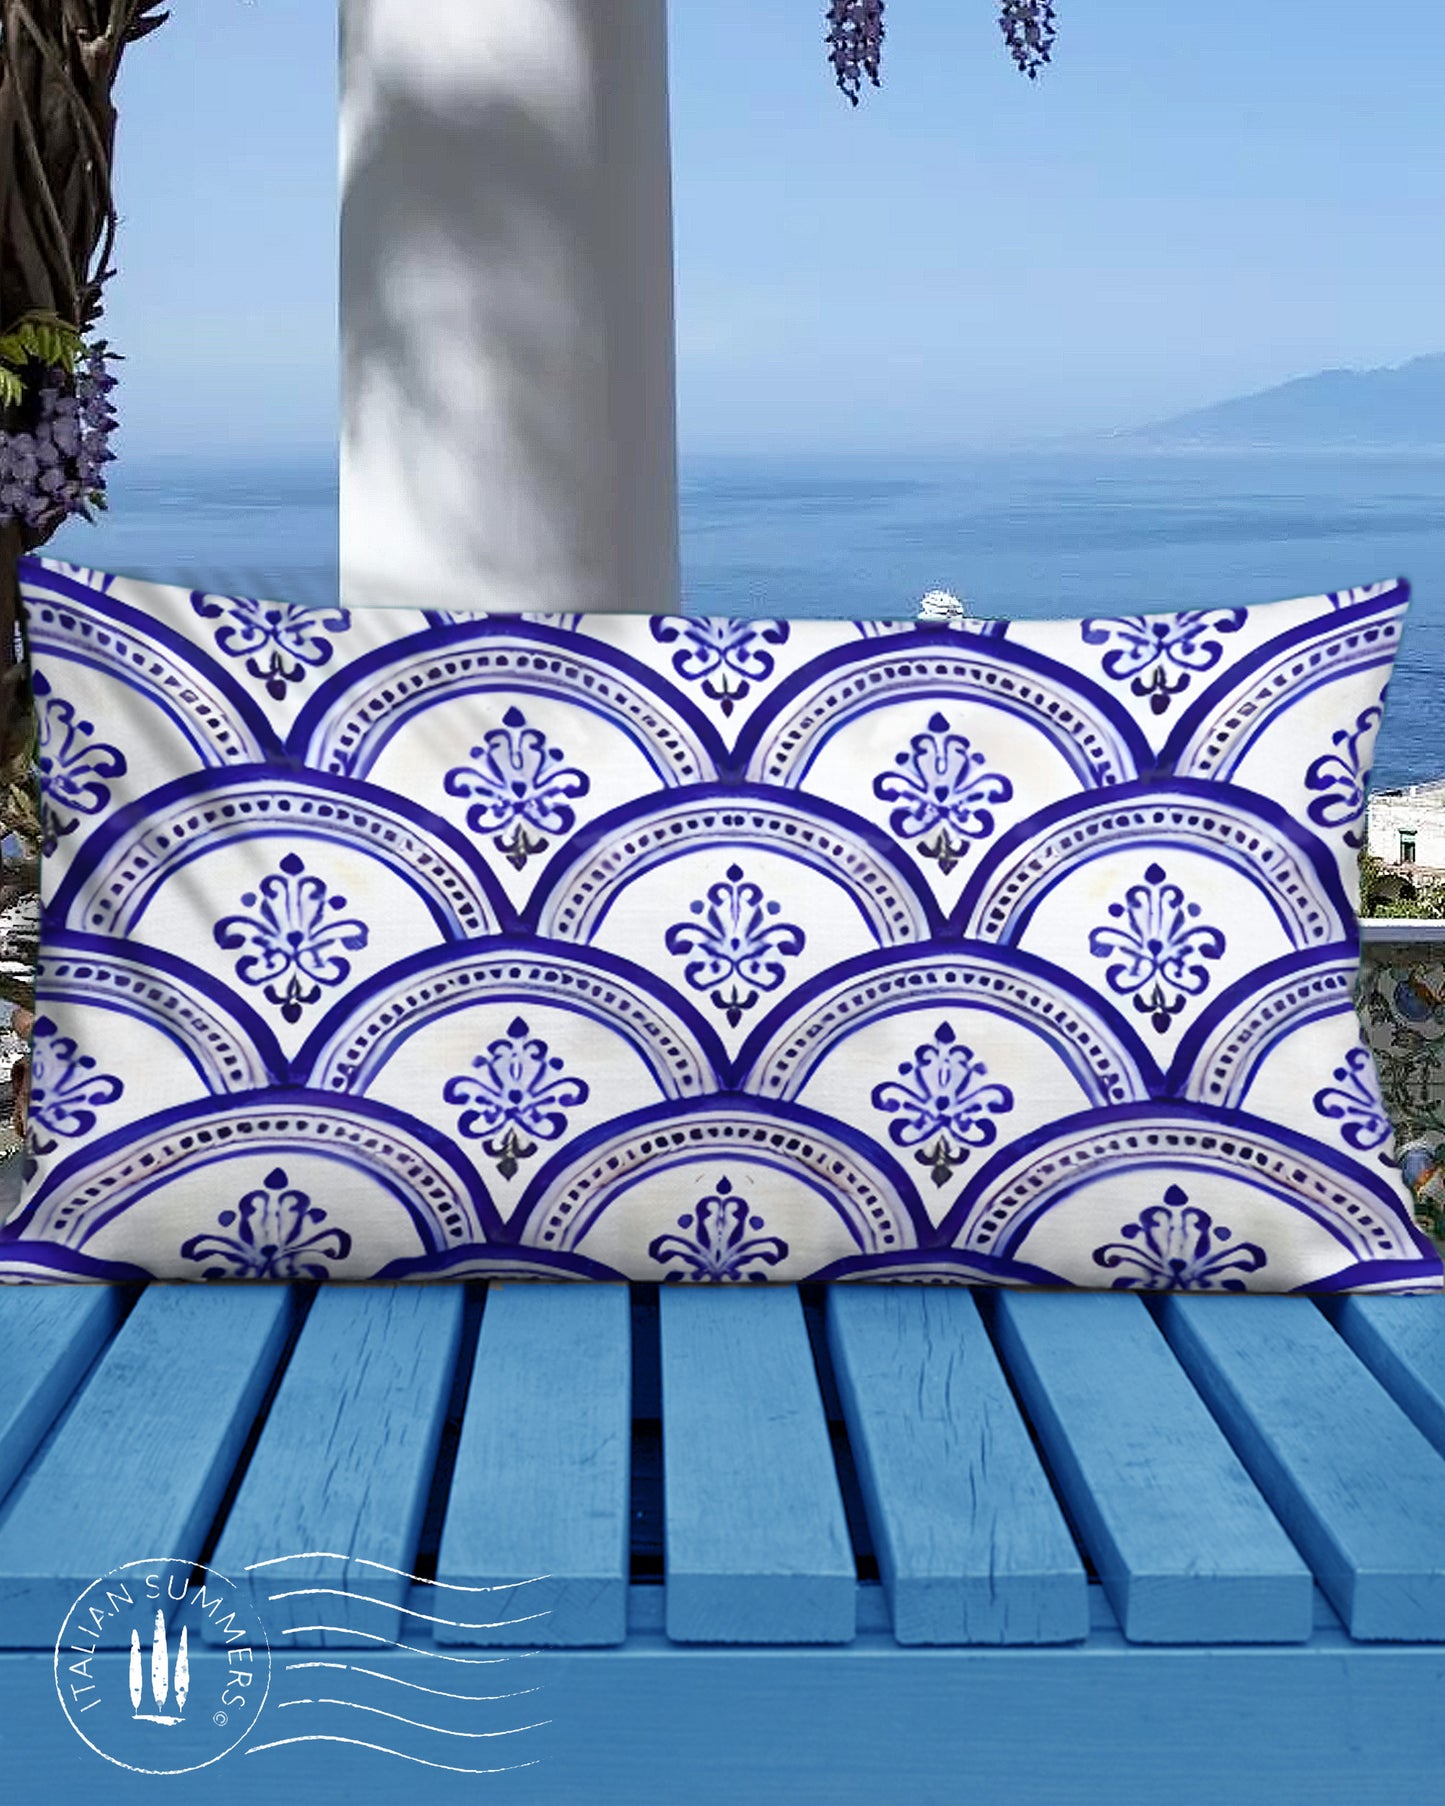 Pillow case Sogno d'Amalfi by Italian Summers, made to order Mediterranean-style inspired by the Maiolica domes of the enchanted Coast of Amalfi